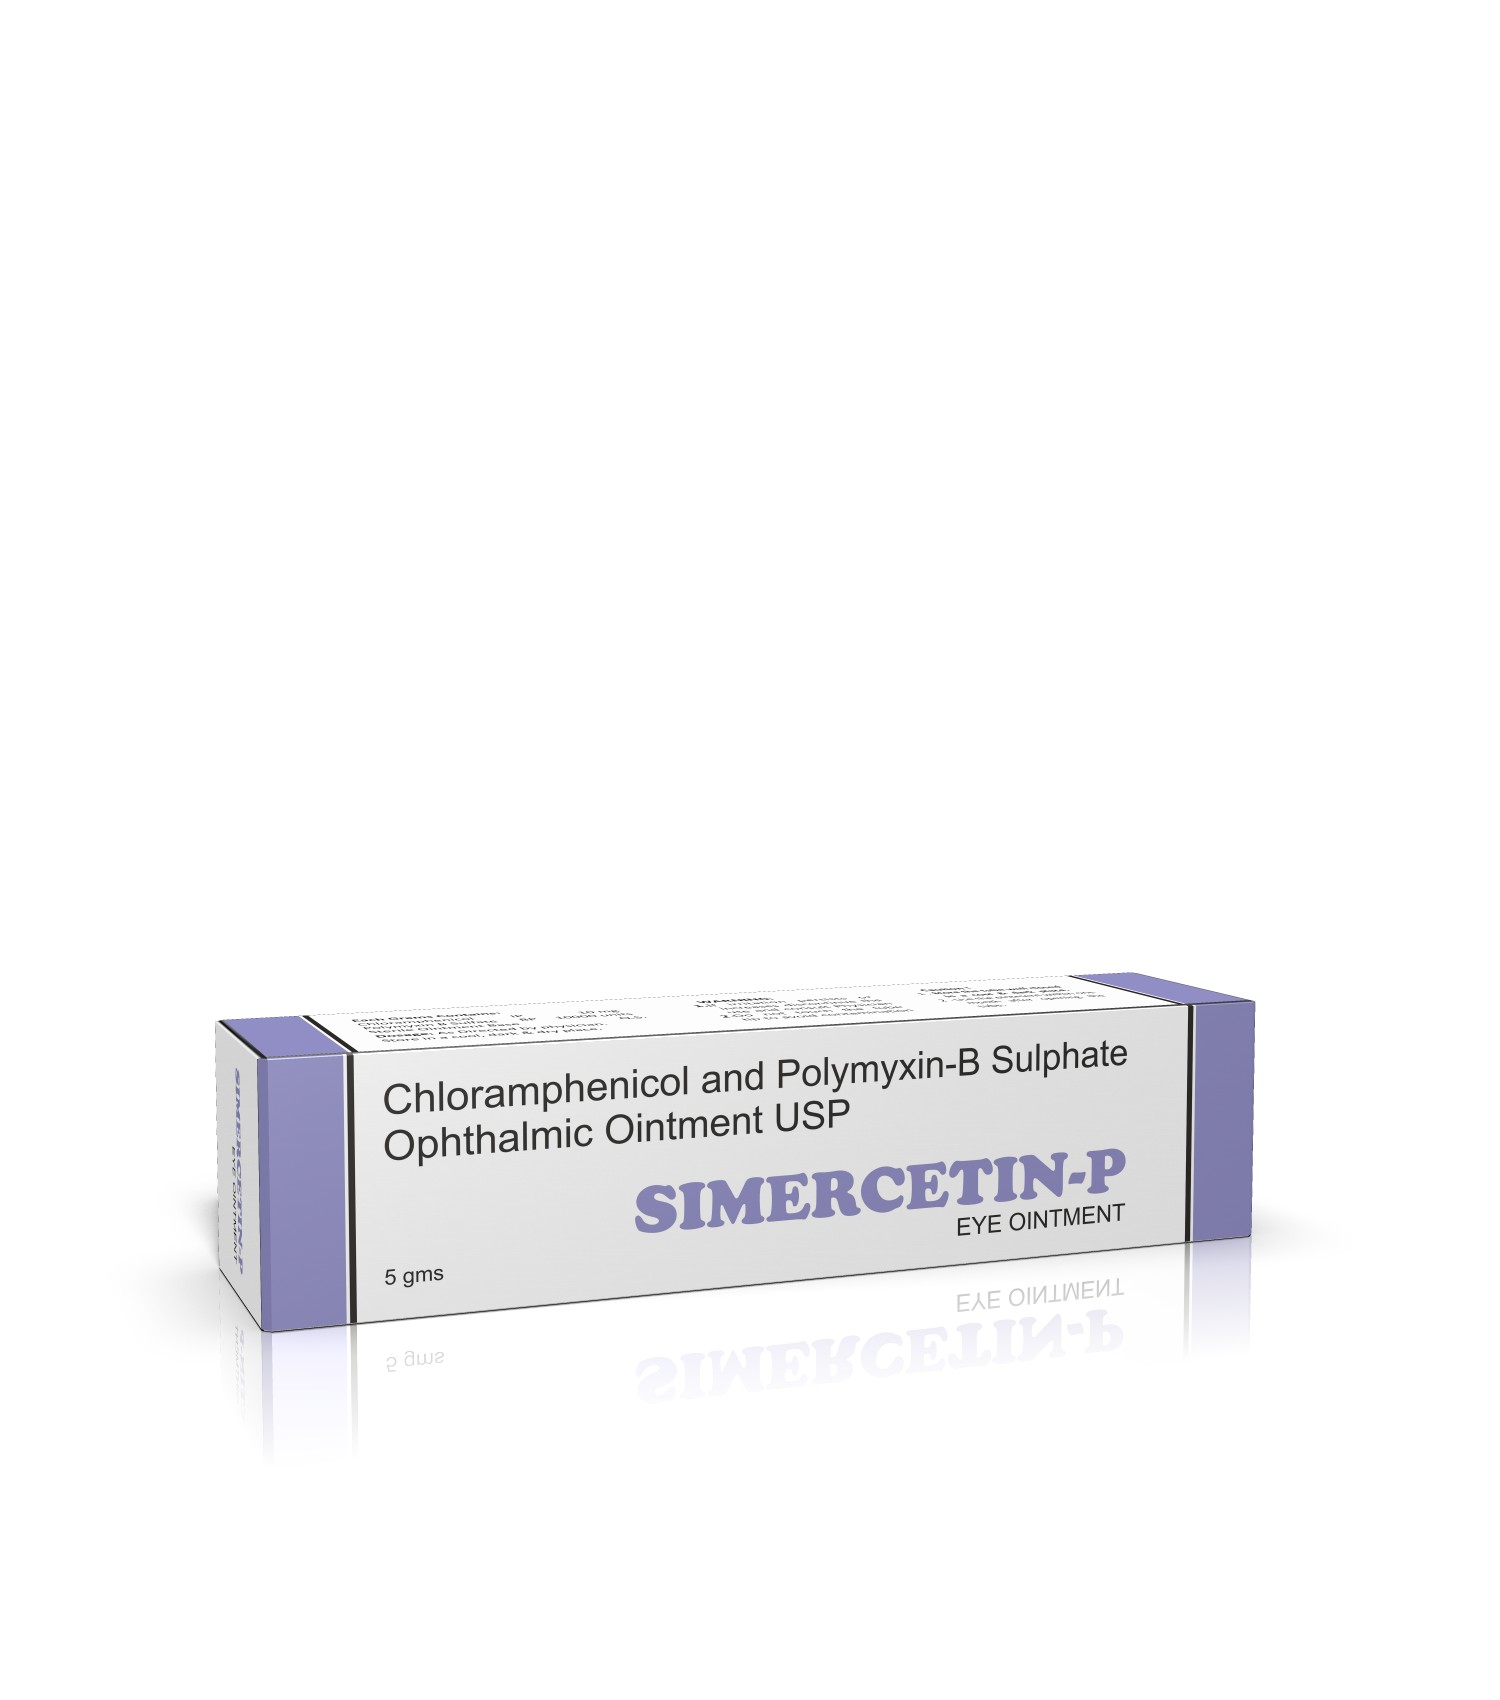 chloramphenicol-&-polymyxin-b-sulphate-eye-ointment